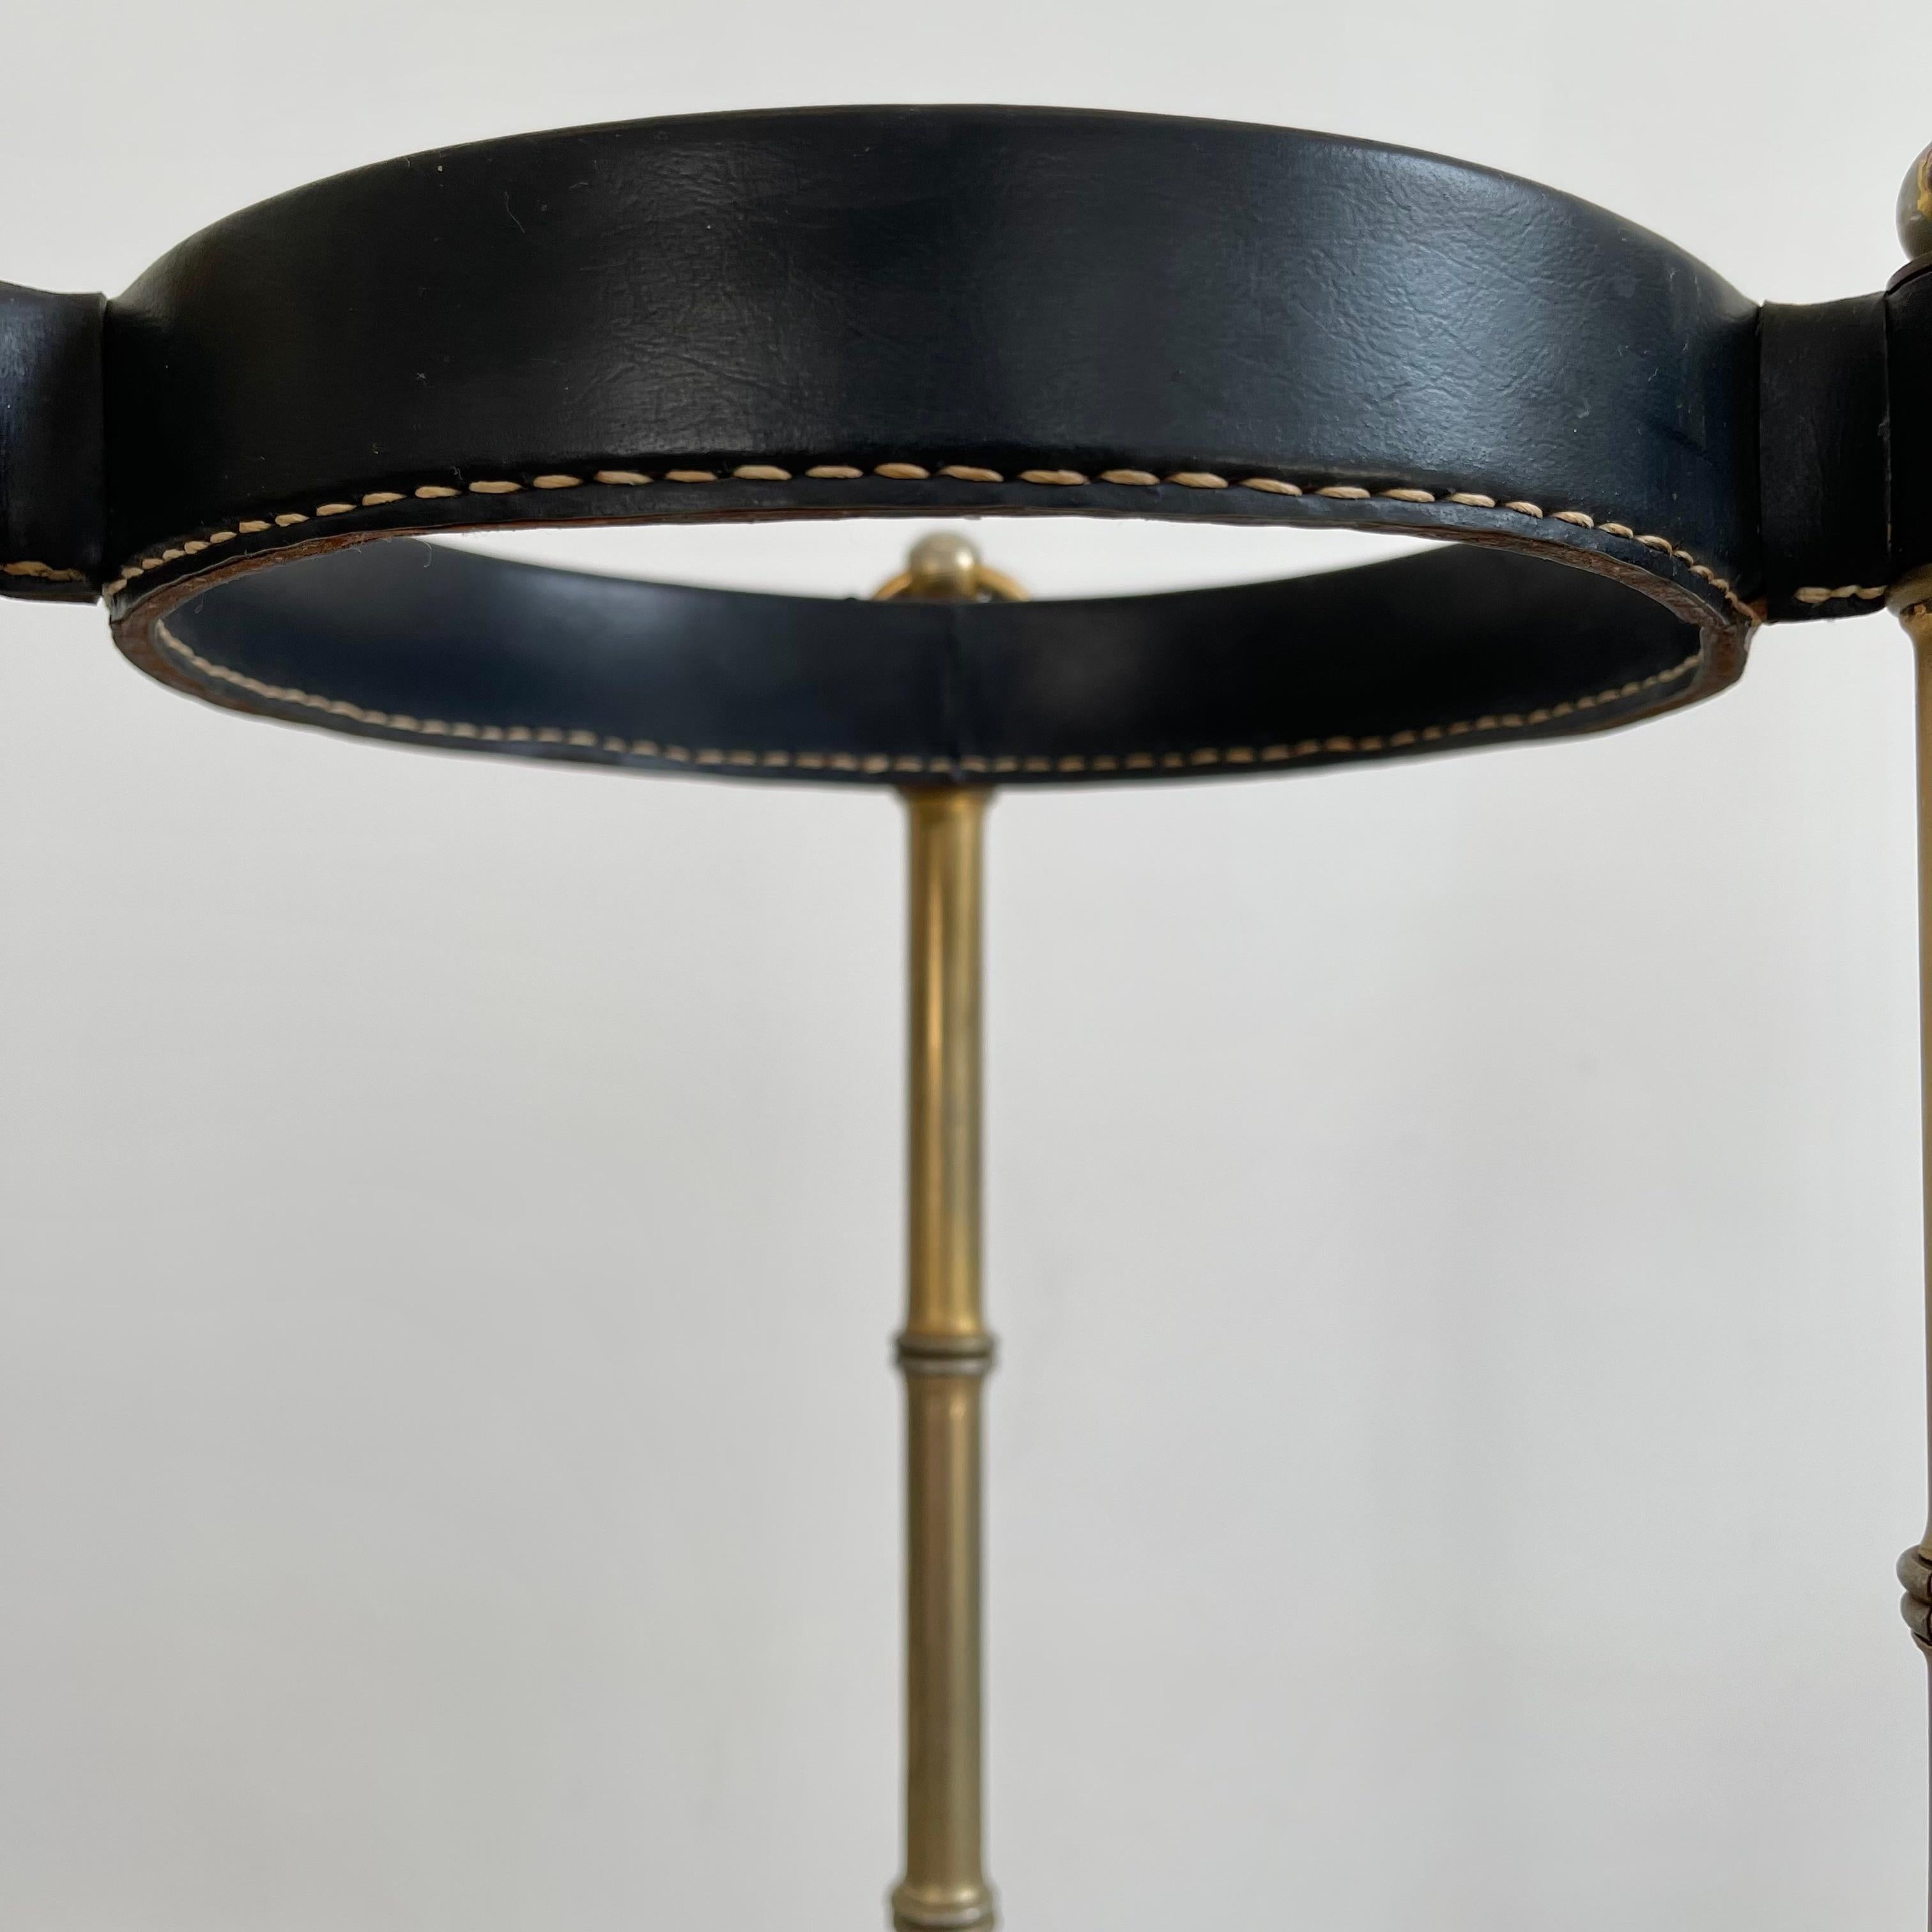 Jacques Adnet Leather and Brass Umbrella Stand, 1950s For Sale 5